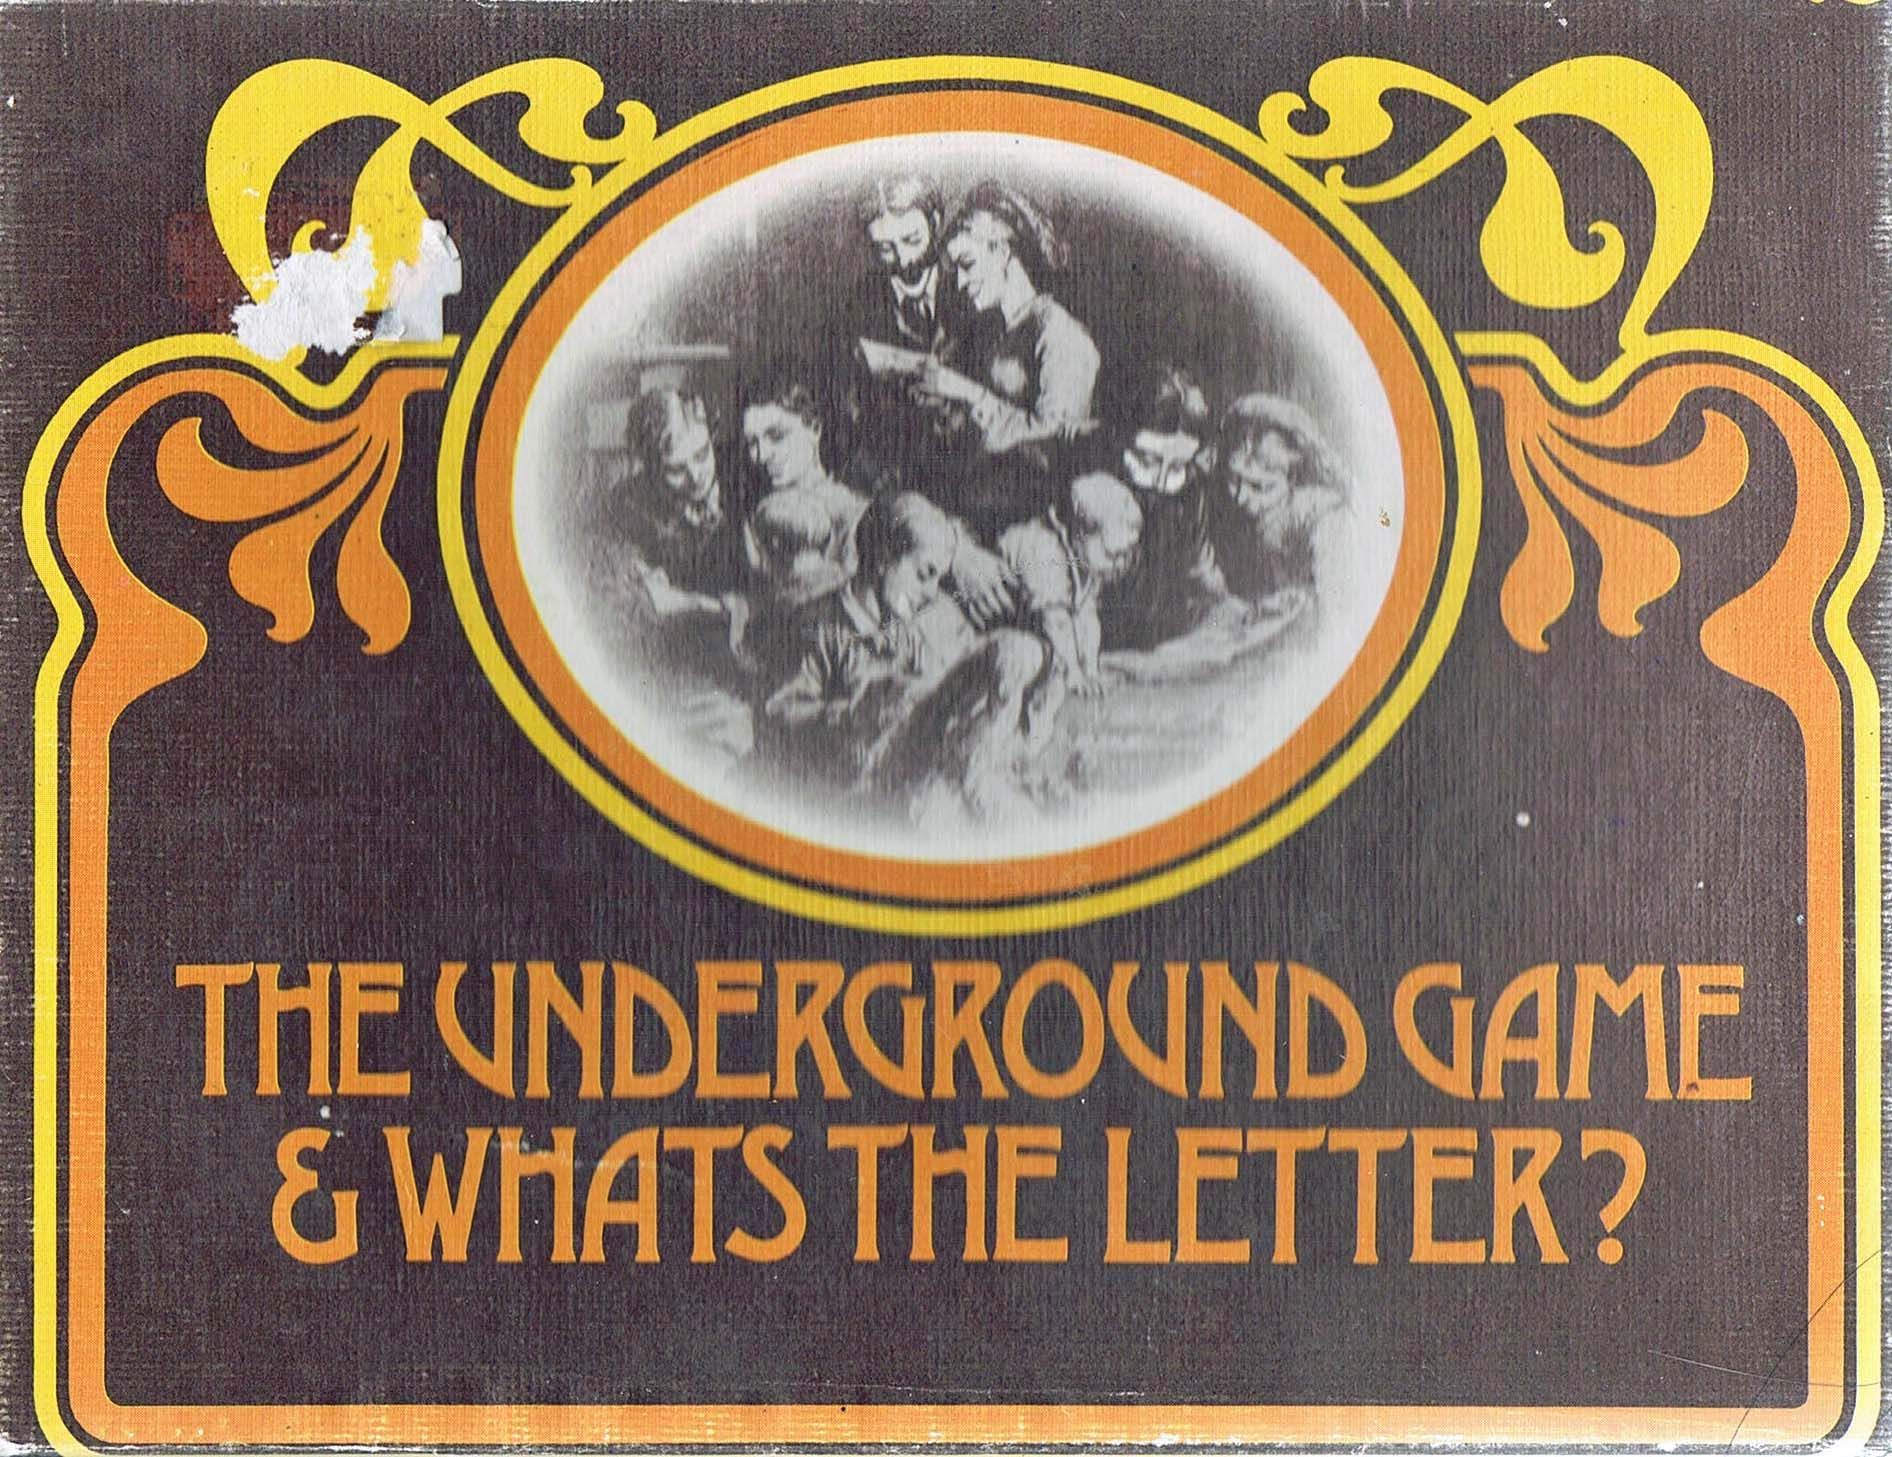 The Underground Game & What's the Letter?